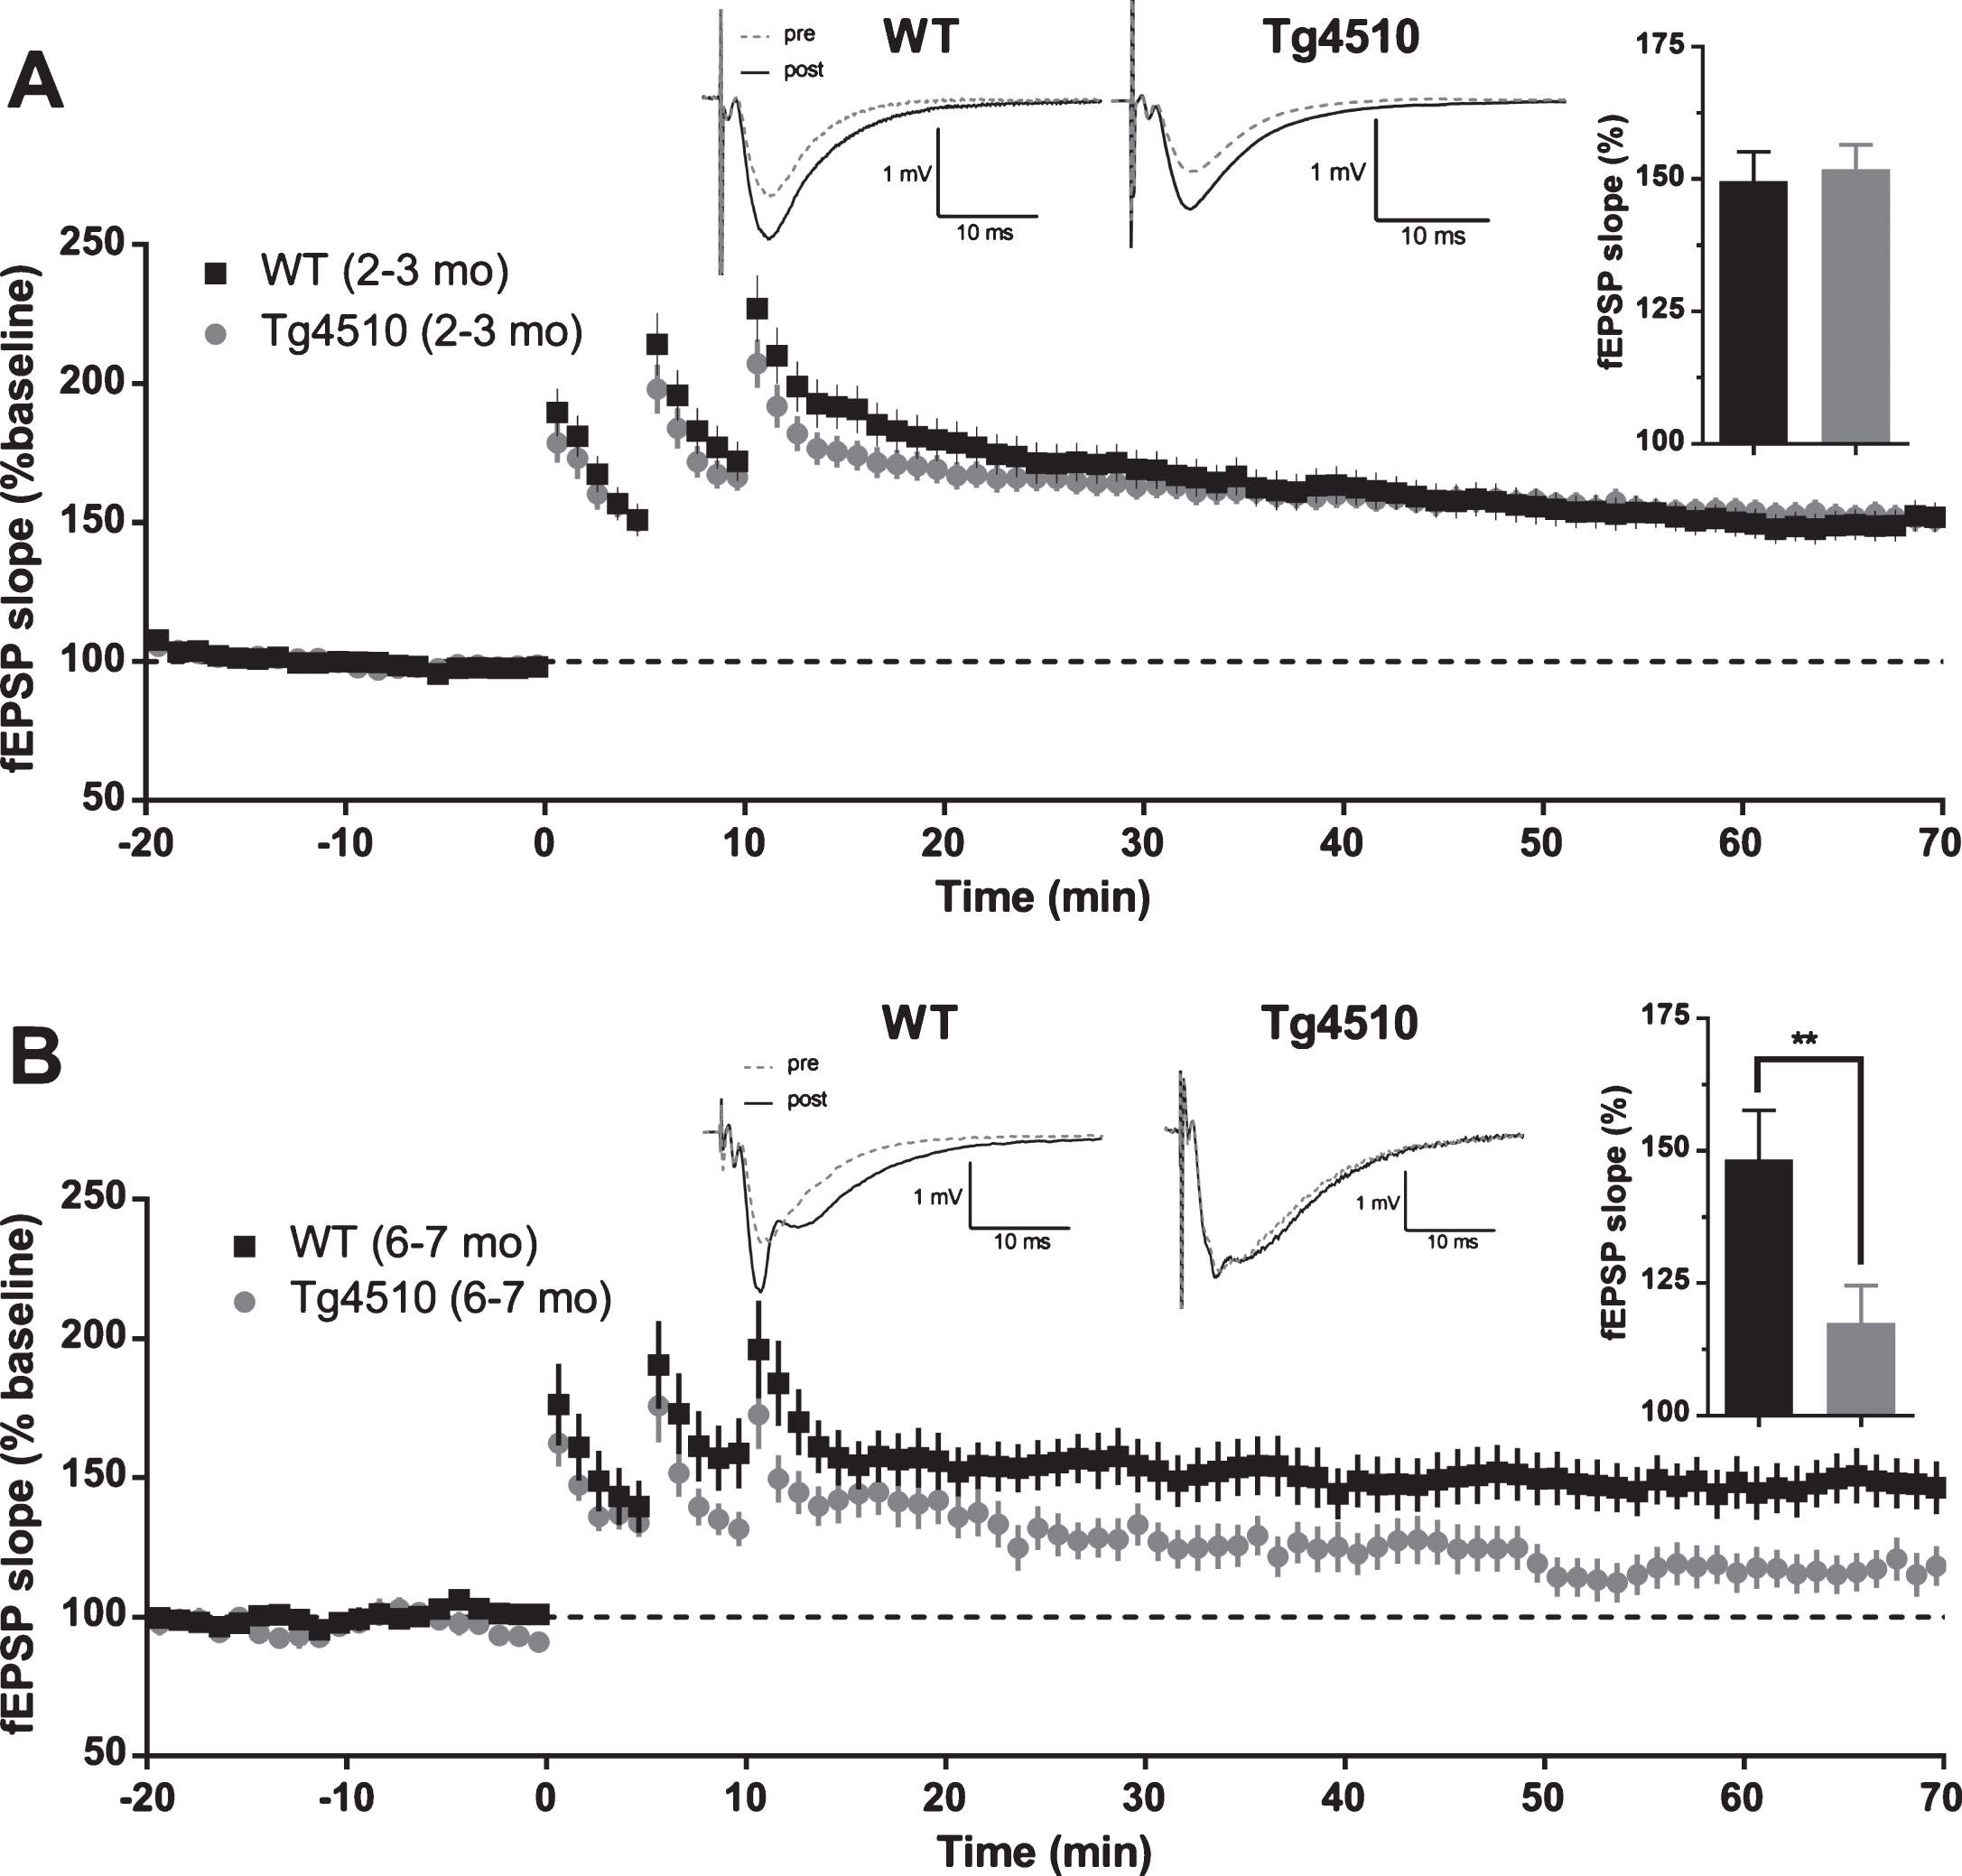 Long-term potentiation (LTP) in rTg4510 mice. A) Average baseline-normalized time course of long term potentiation of fEPSP slope in response to high frequency stimulation in 2-3-month-old rTg4510 mice. Example traces represent averaged responses (4 traces) before HFS and at 60 min post last HFS bout. (Inset). Averaged normalized response from the last 5 min of recordings (WT n = 29 slices from 9 animals; rTg4510 n = 29 slices from 9 animals; two-tailed t-test p = 0.7527). B) Average baseline-normalized time course of long term potentiation of fEPSP slope in response to high frequency stimulation in 6-7-month-old rTg4510 mice. Example traces represent averaged responses (4 traces) before HFS and at 60 min post last HFS bout. (Inset). Averaged normalized response from the last 5 min of recordings (WT n = 18 slices from 7 animals; rTg4510 n = 13 slices from 7 animals; two-tailed t-test p = 0.0199).